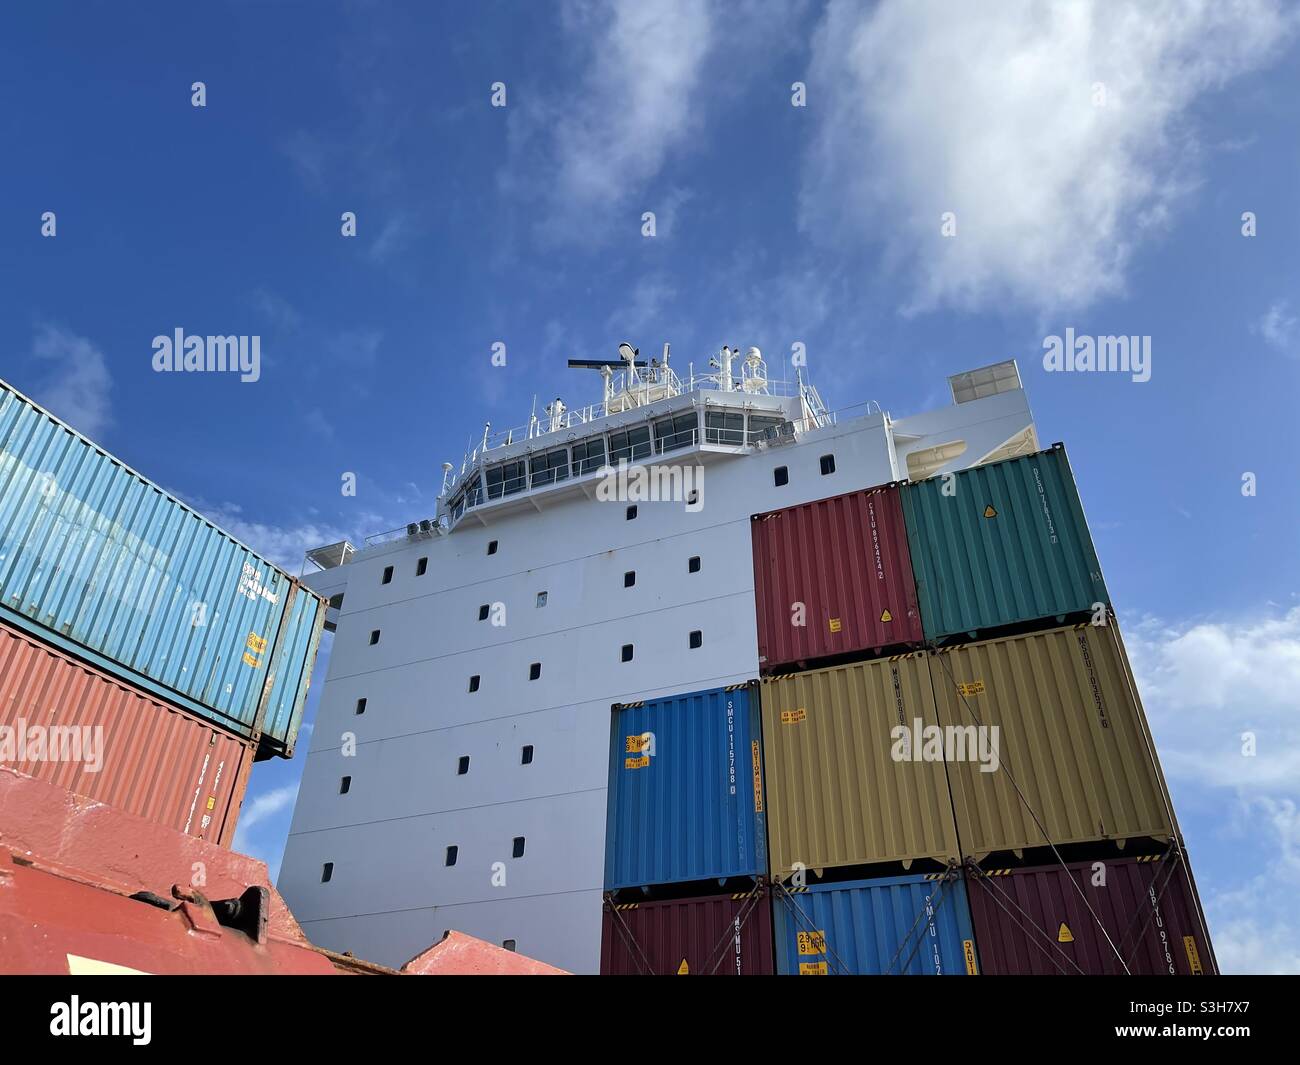 White superstructure with navigational bridge of the container vessel underway loaded with containers from various shippers. Stock Photo